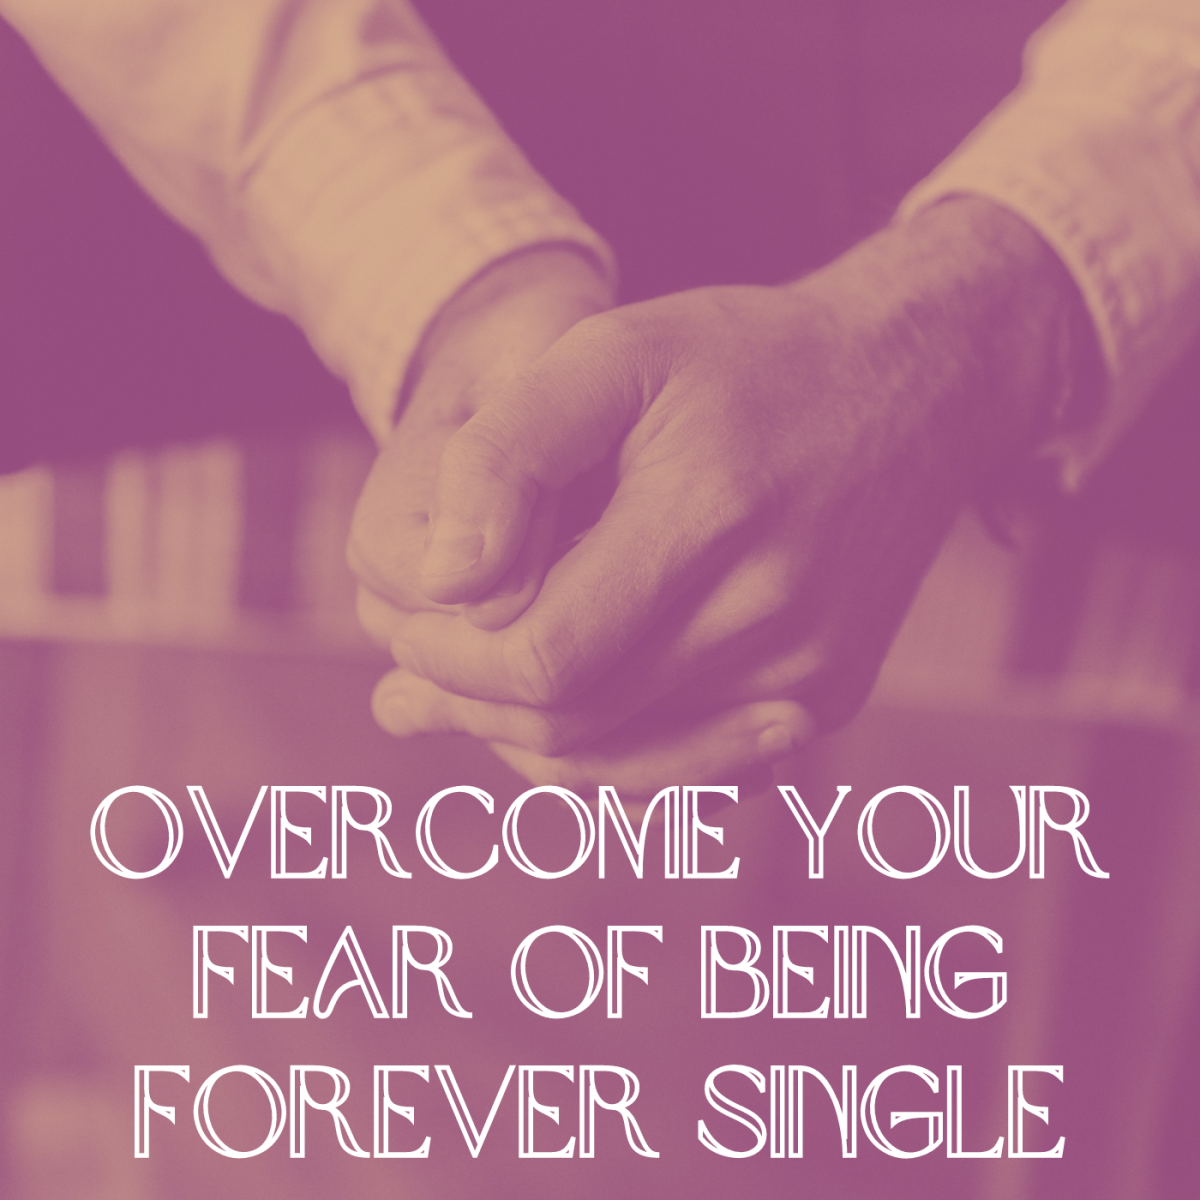 10 Ways to Get Rid of Your Fear of Being Forever Single